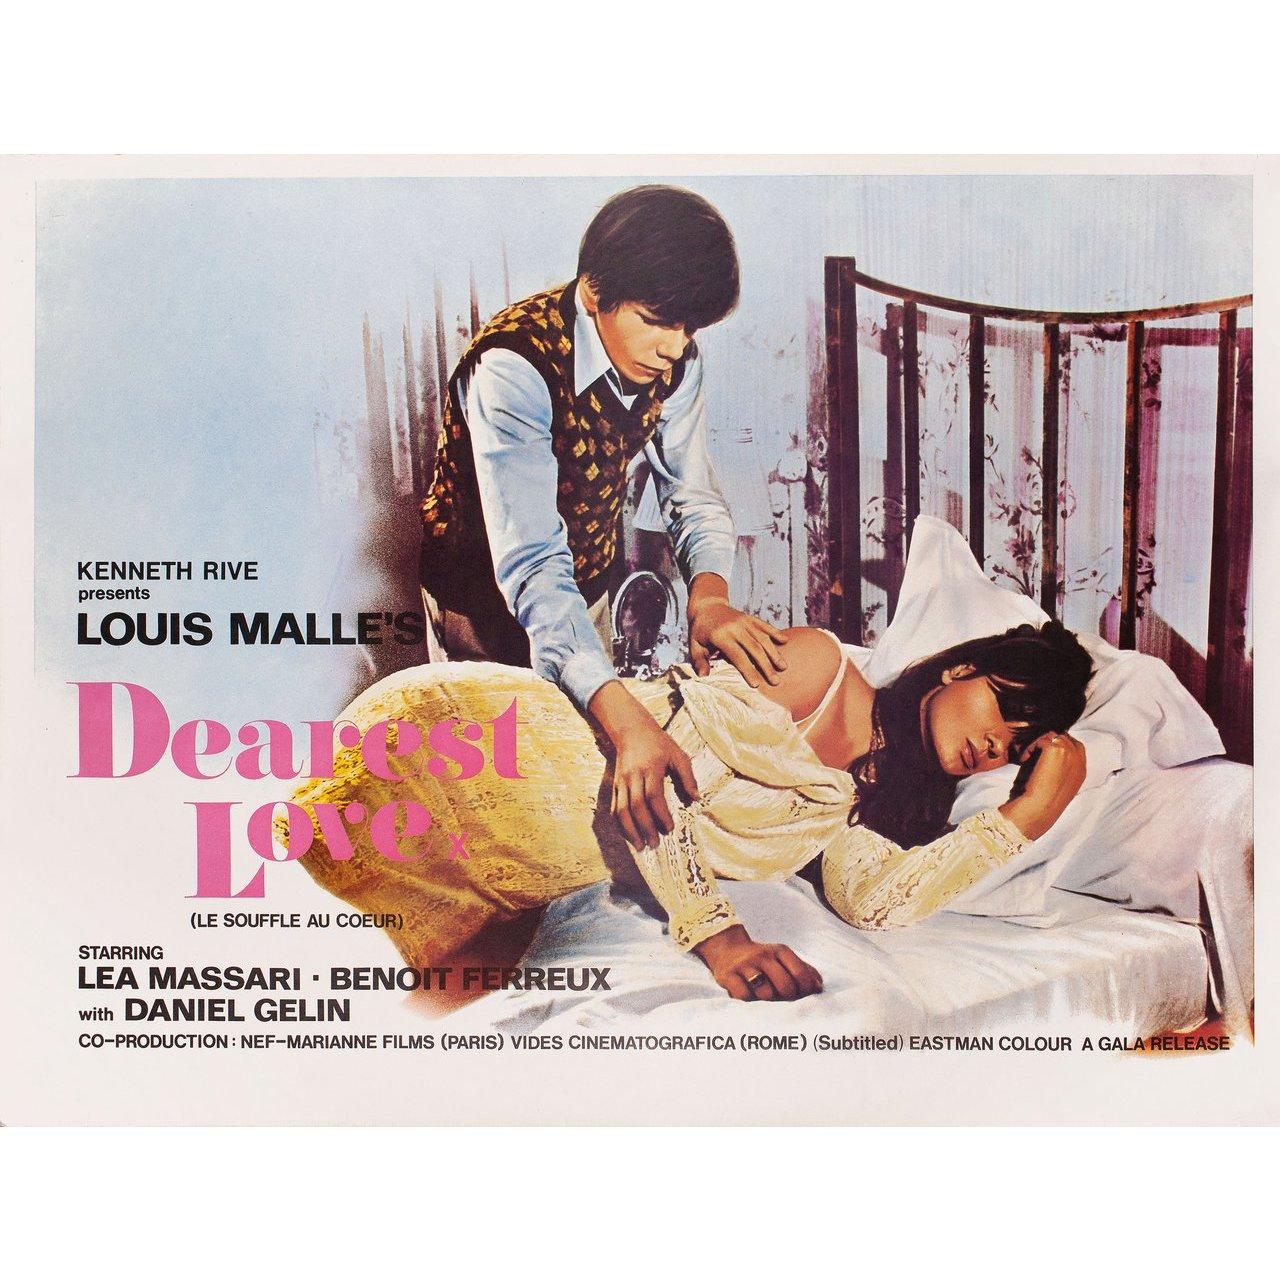 Original 1971 British quad poster for the film Murmur of the Heart (Le souffle au coeur) directed by Louis Malle with Lea Massari / Benoit Ferreux / Daniel Gelin / Michael Lonsdale. Very good-fine condition, rolled. Please note: the size is stated